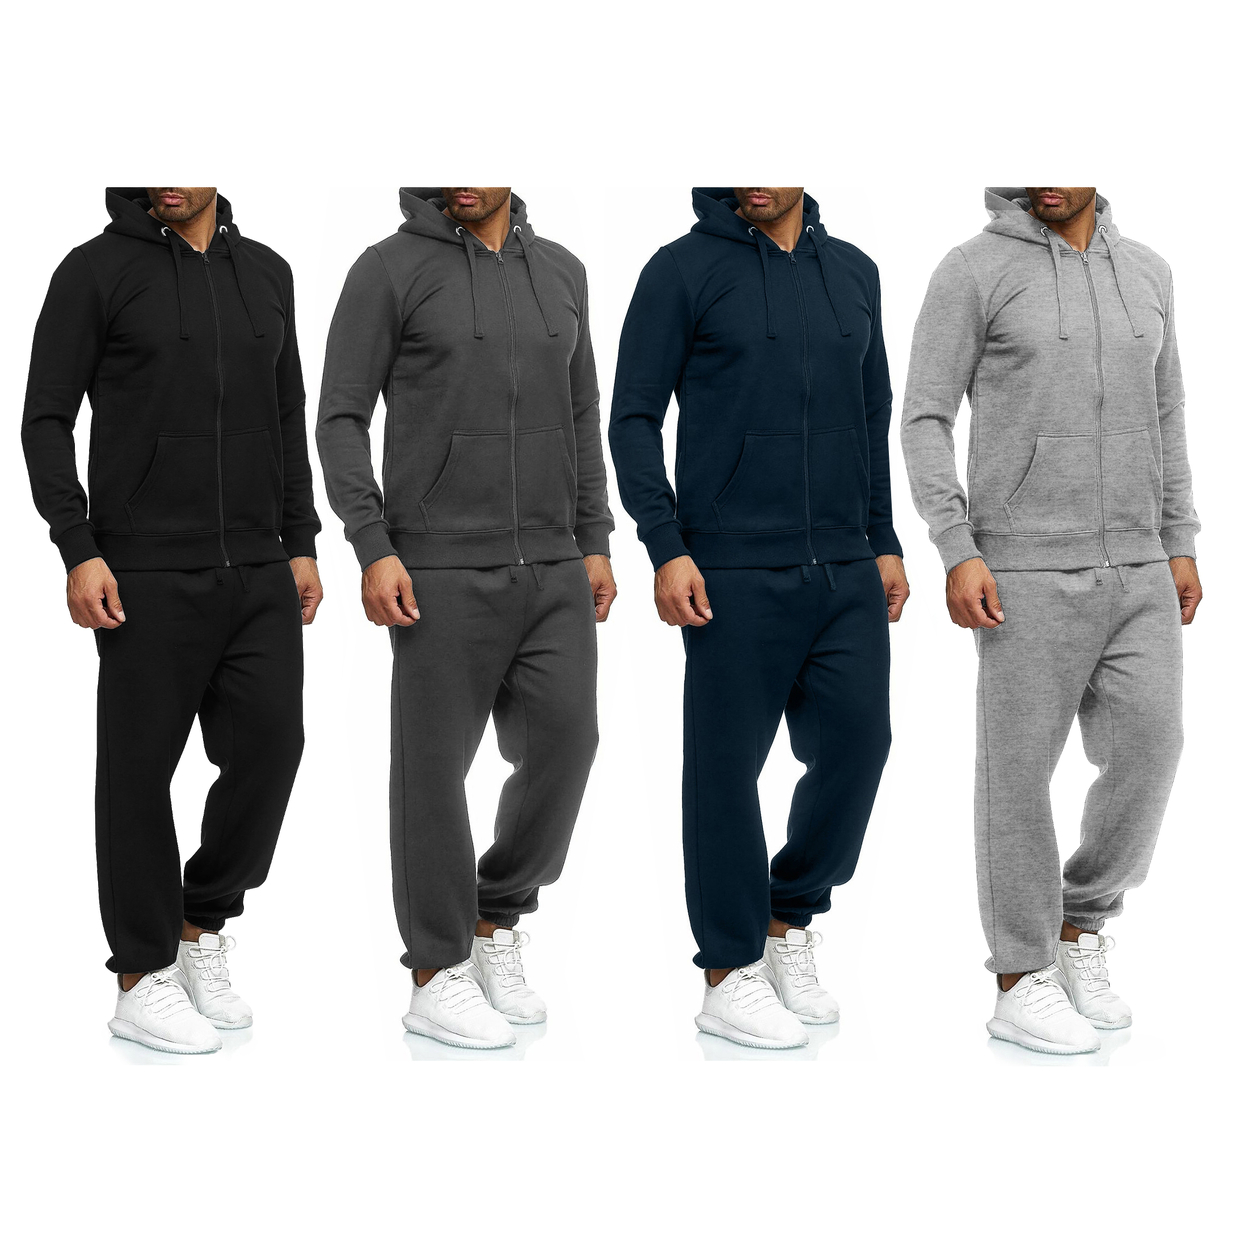 Multi-Pack: Men's Casual Big & Tall Athletic Active Winter Warm Fleece Lined Full Zip Tracksuit Jogger Set - Black, 2-pack, Small